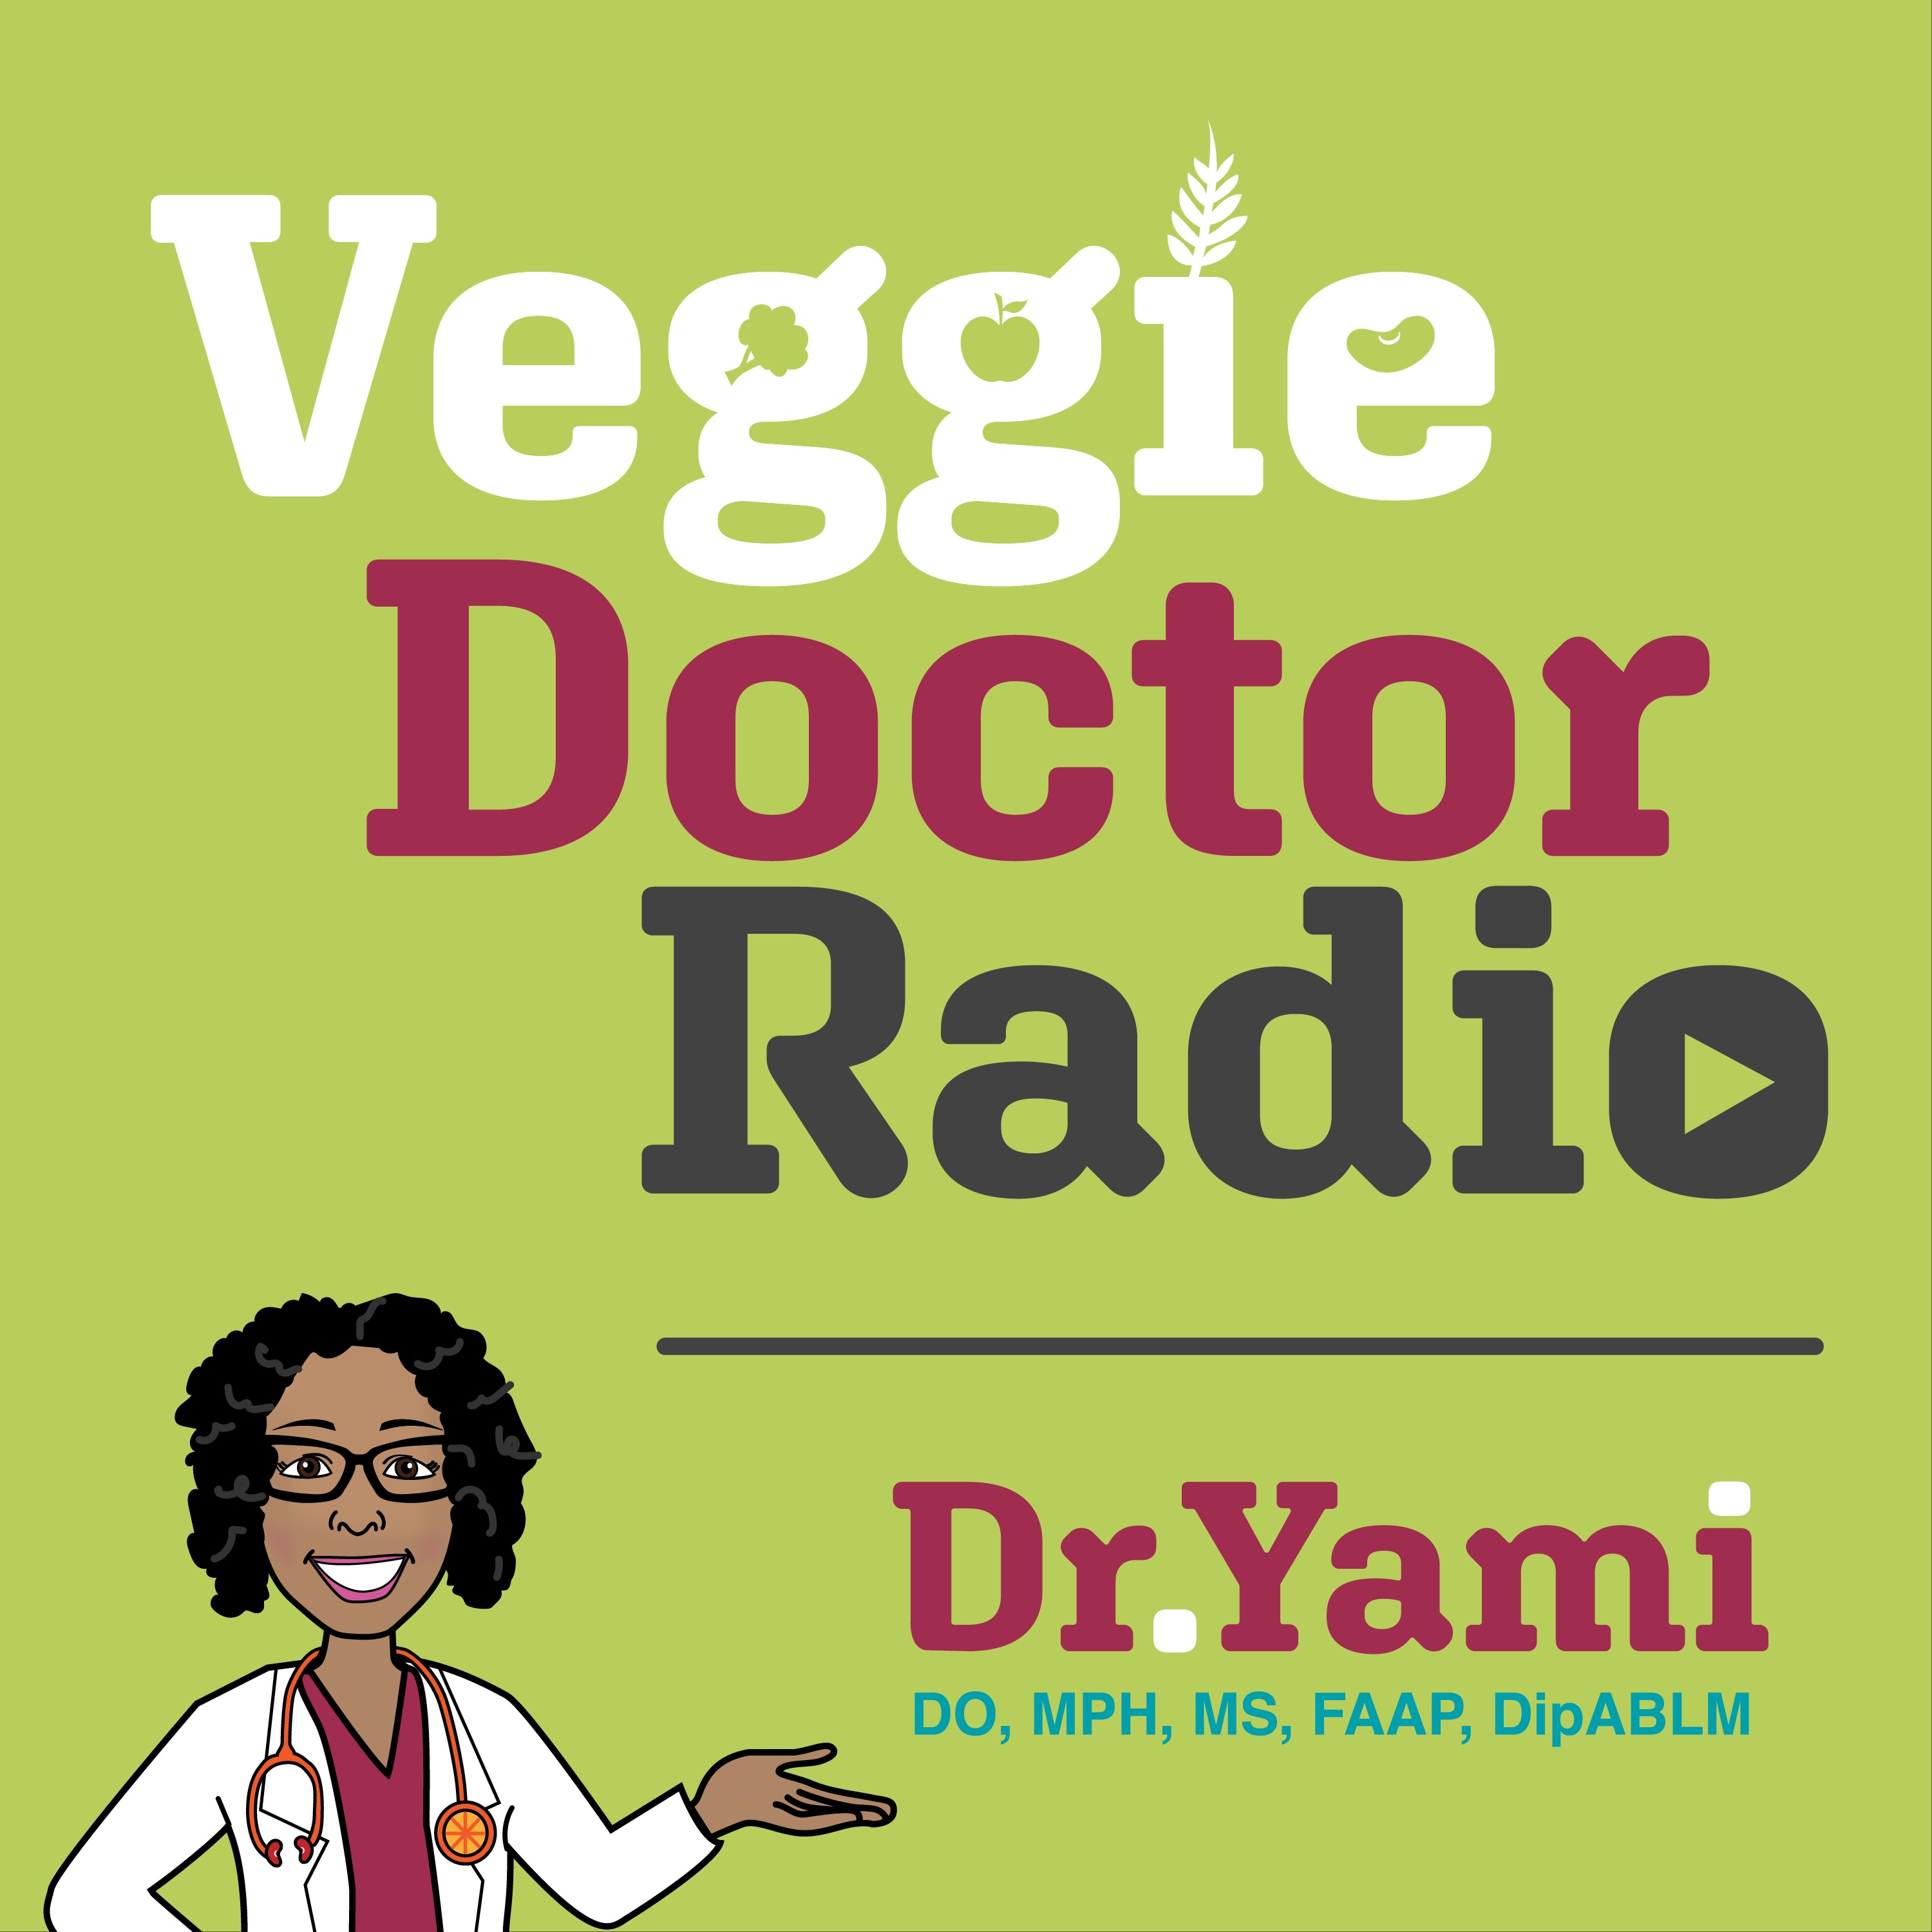 236: How You Approach Your Healthcare Could Be Hurting You with Susan Salenger (Veggie Doctor Radio)